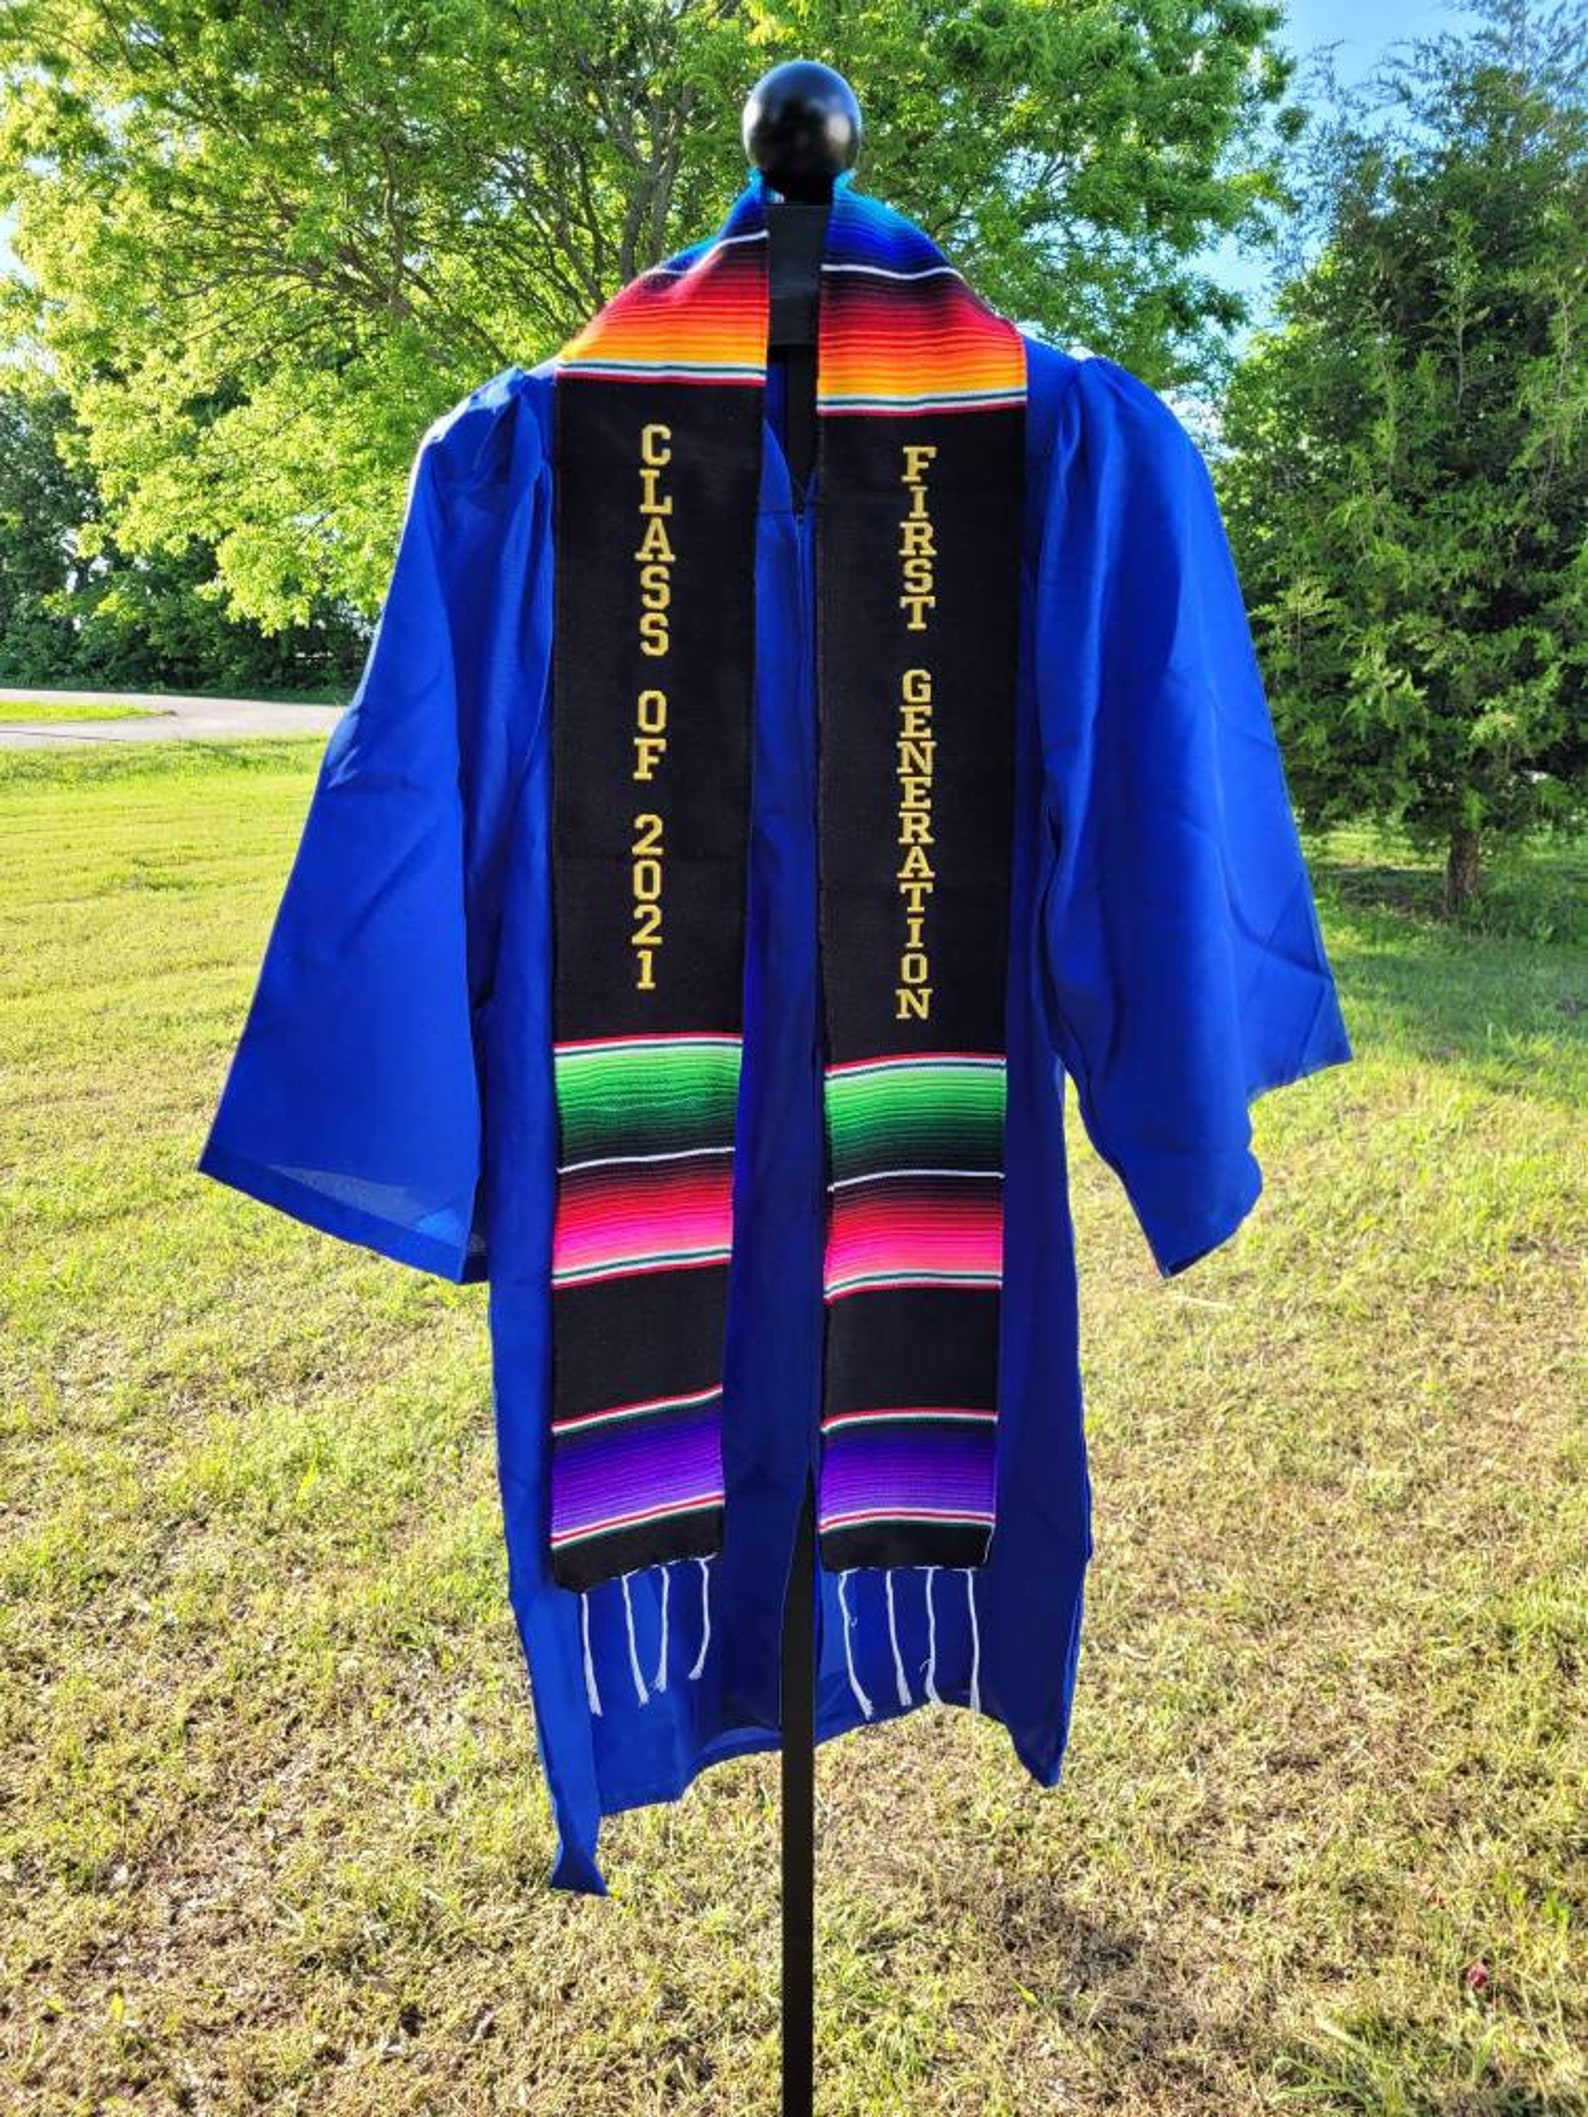 Sarape graduation stole Mexican stole first generation | Etsy